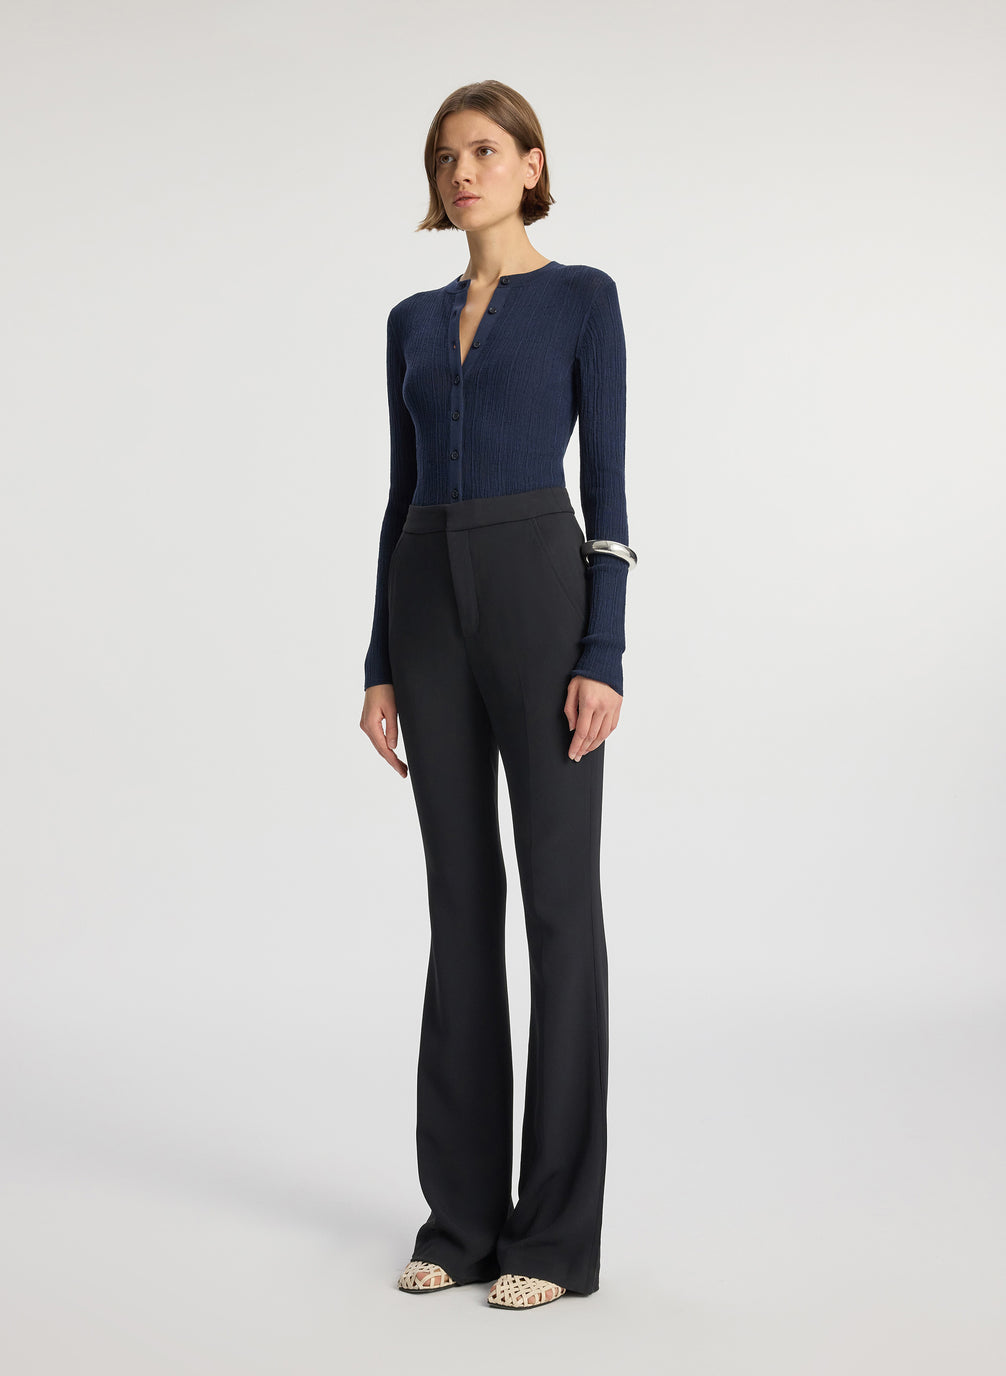 side view of woman wearing navy cardigan and black flared pants